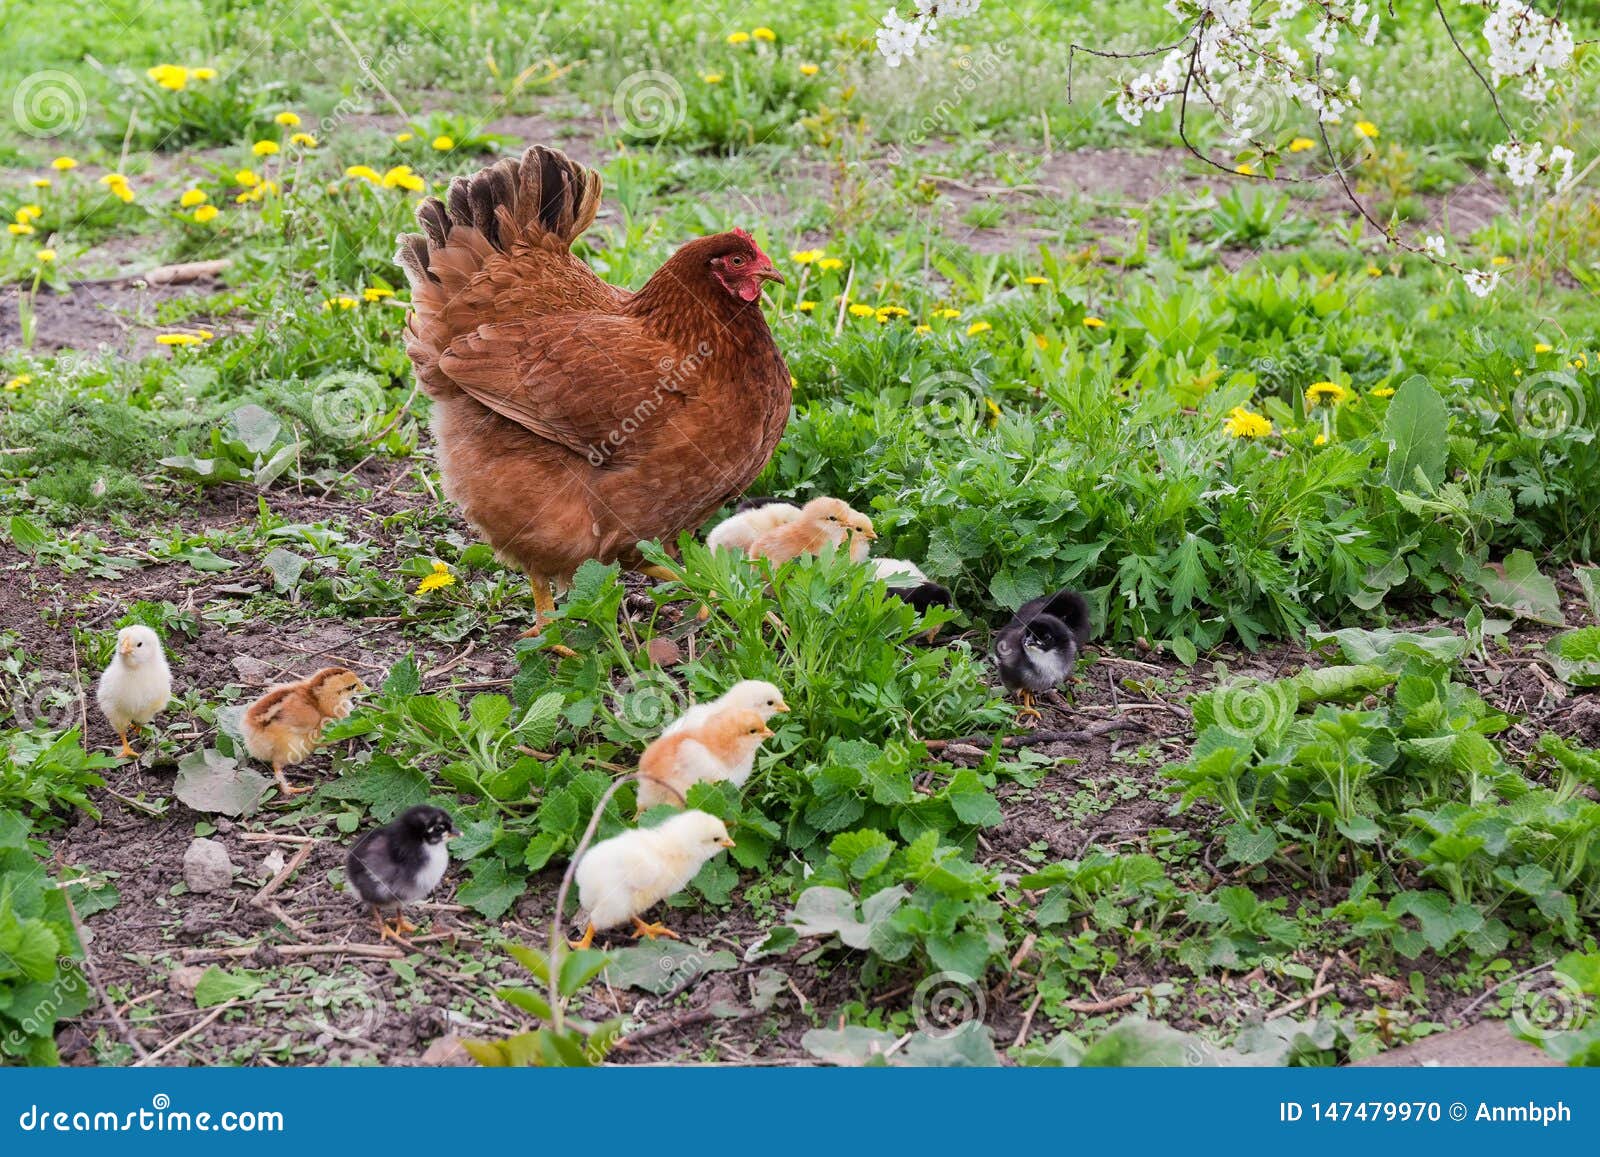 clocking hen with its chicks among grass on the farm